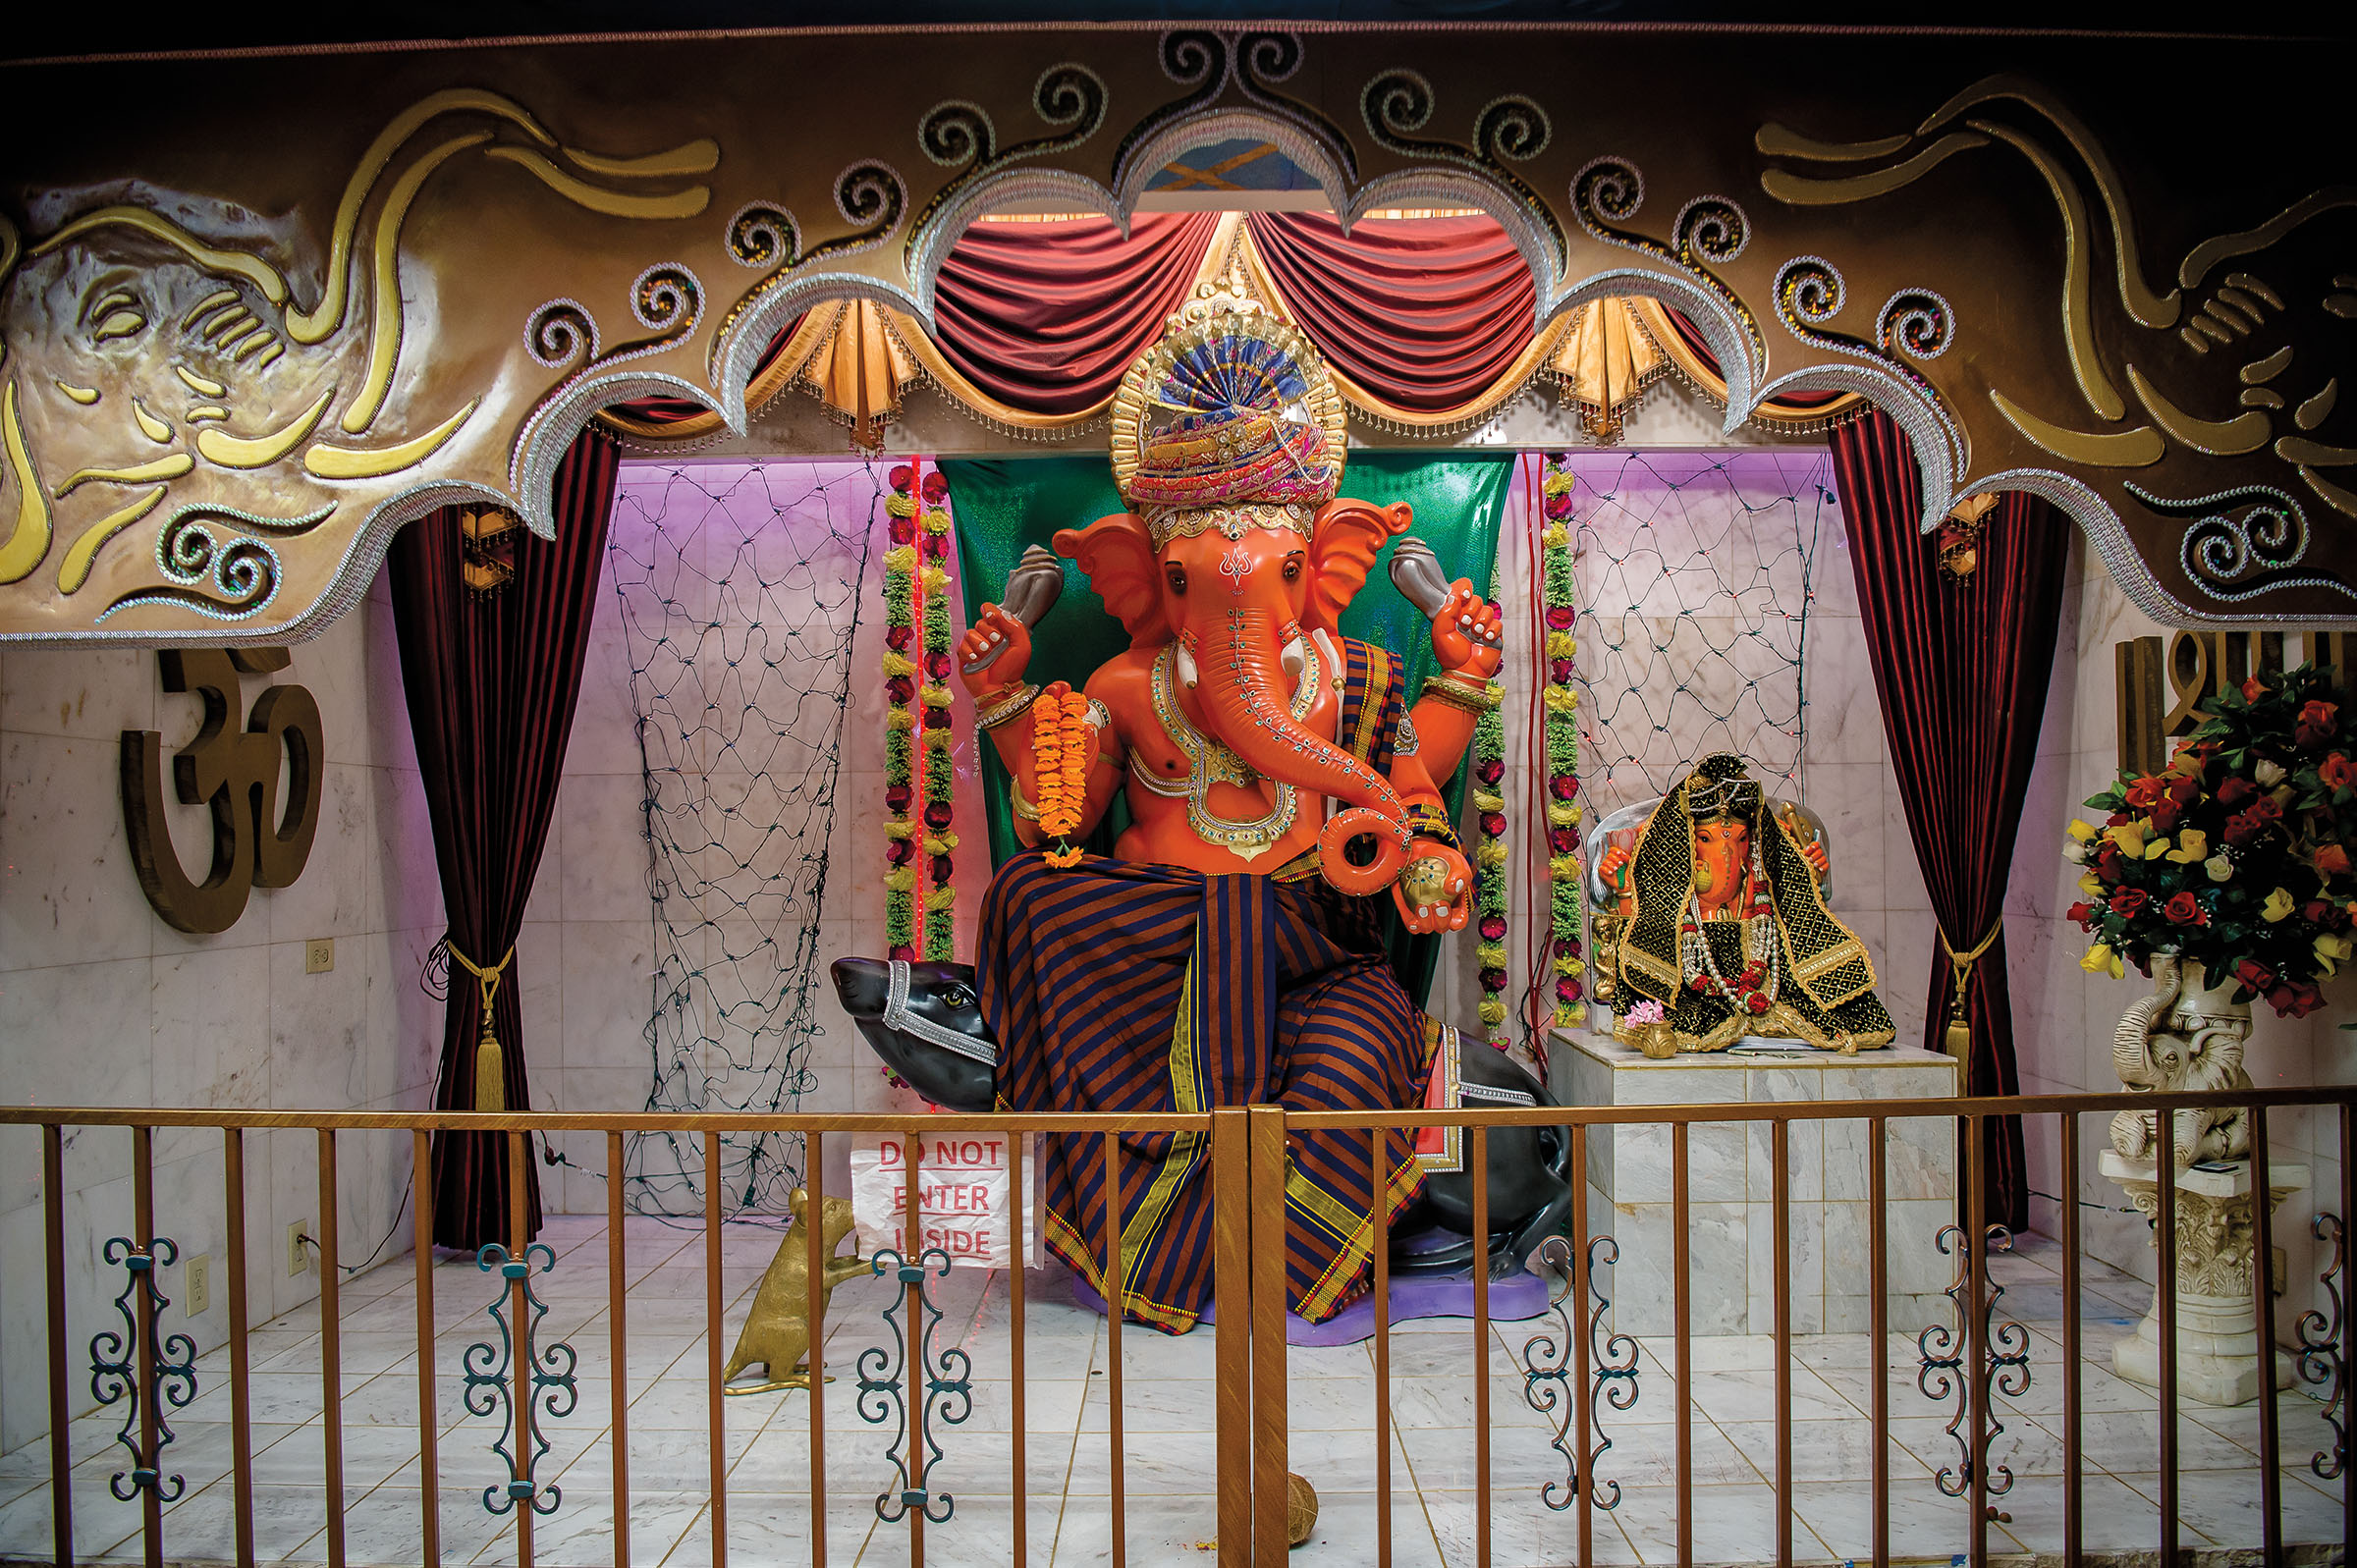 A brightly-colored elephant statue surrounded by gold dressings, flowers and a small gate